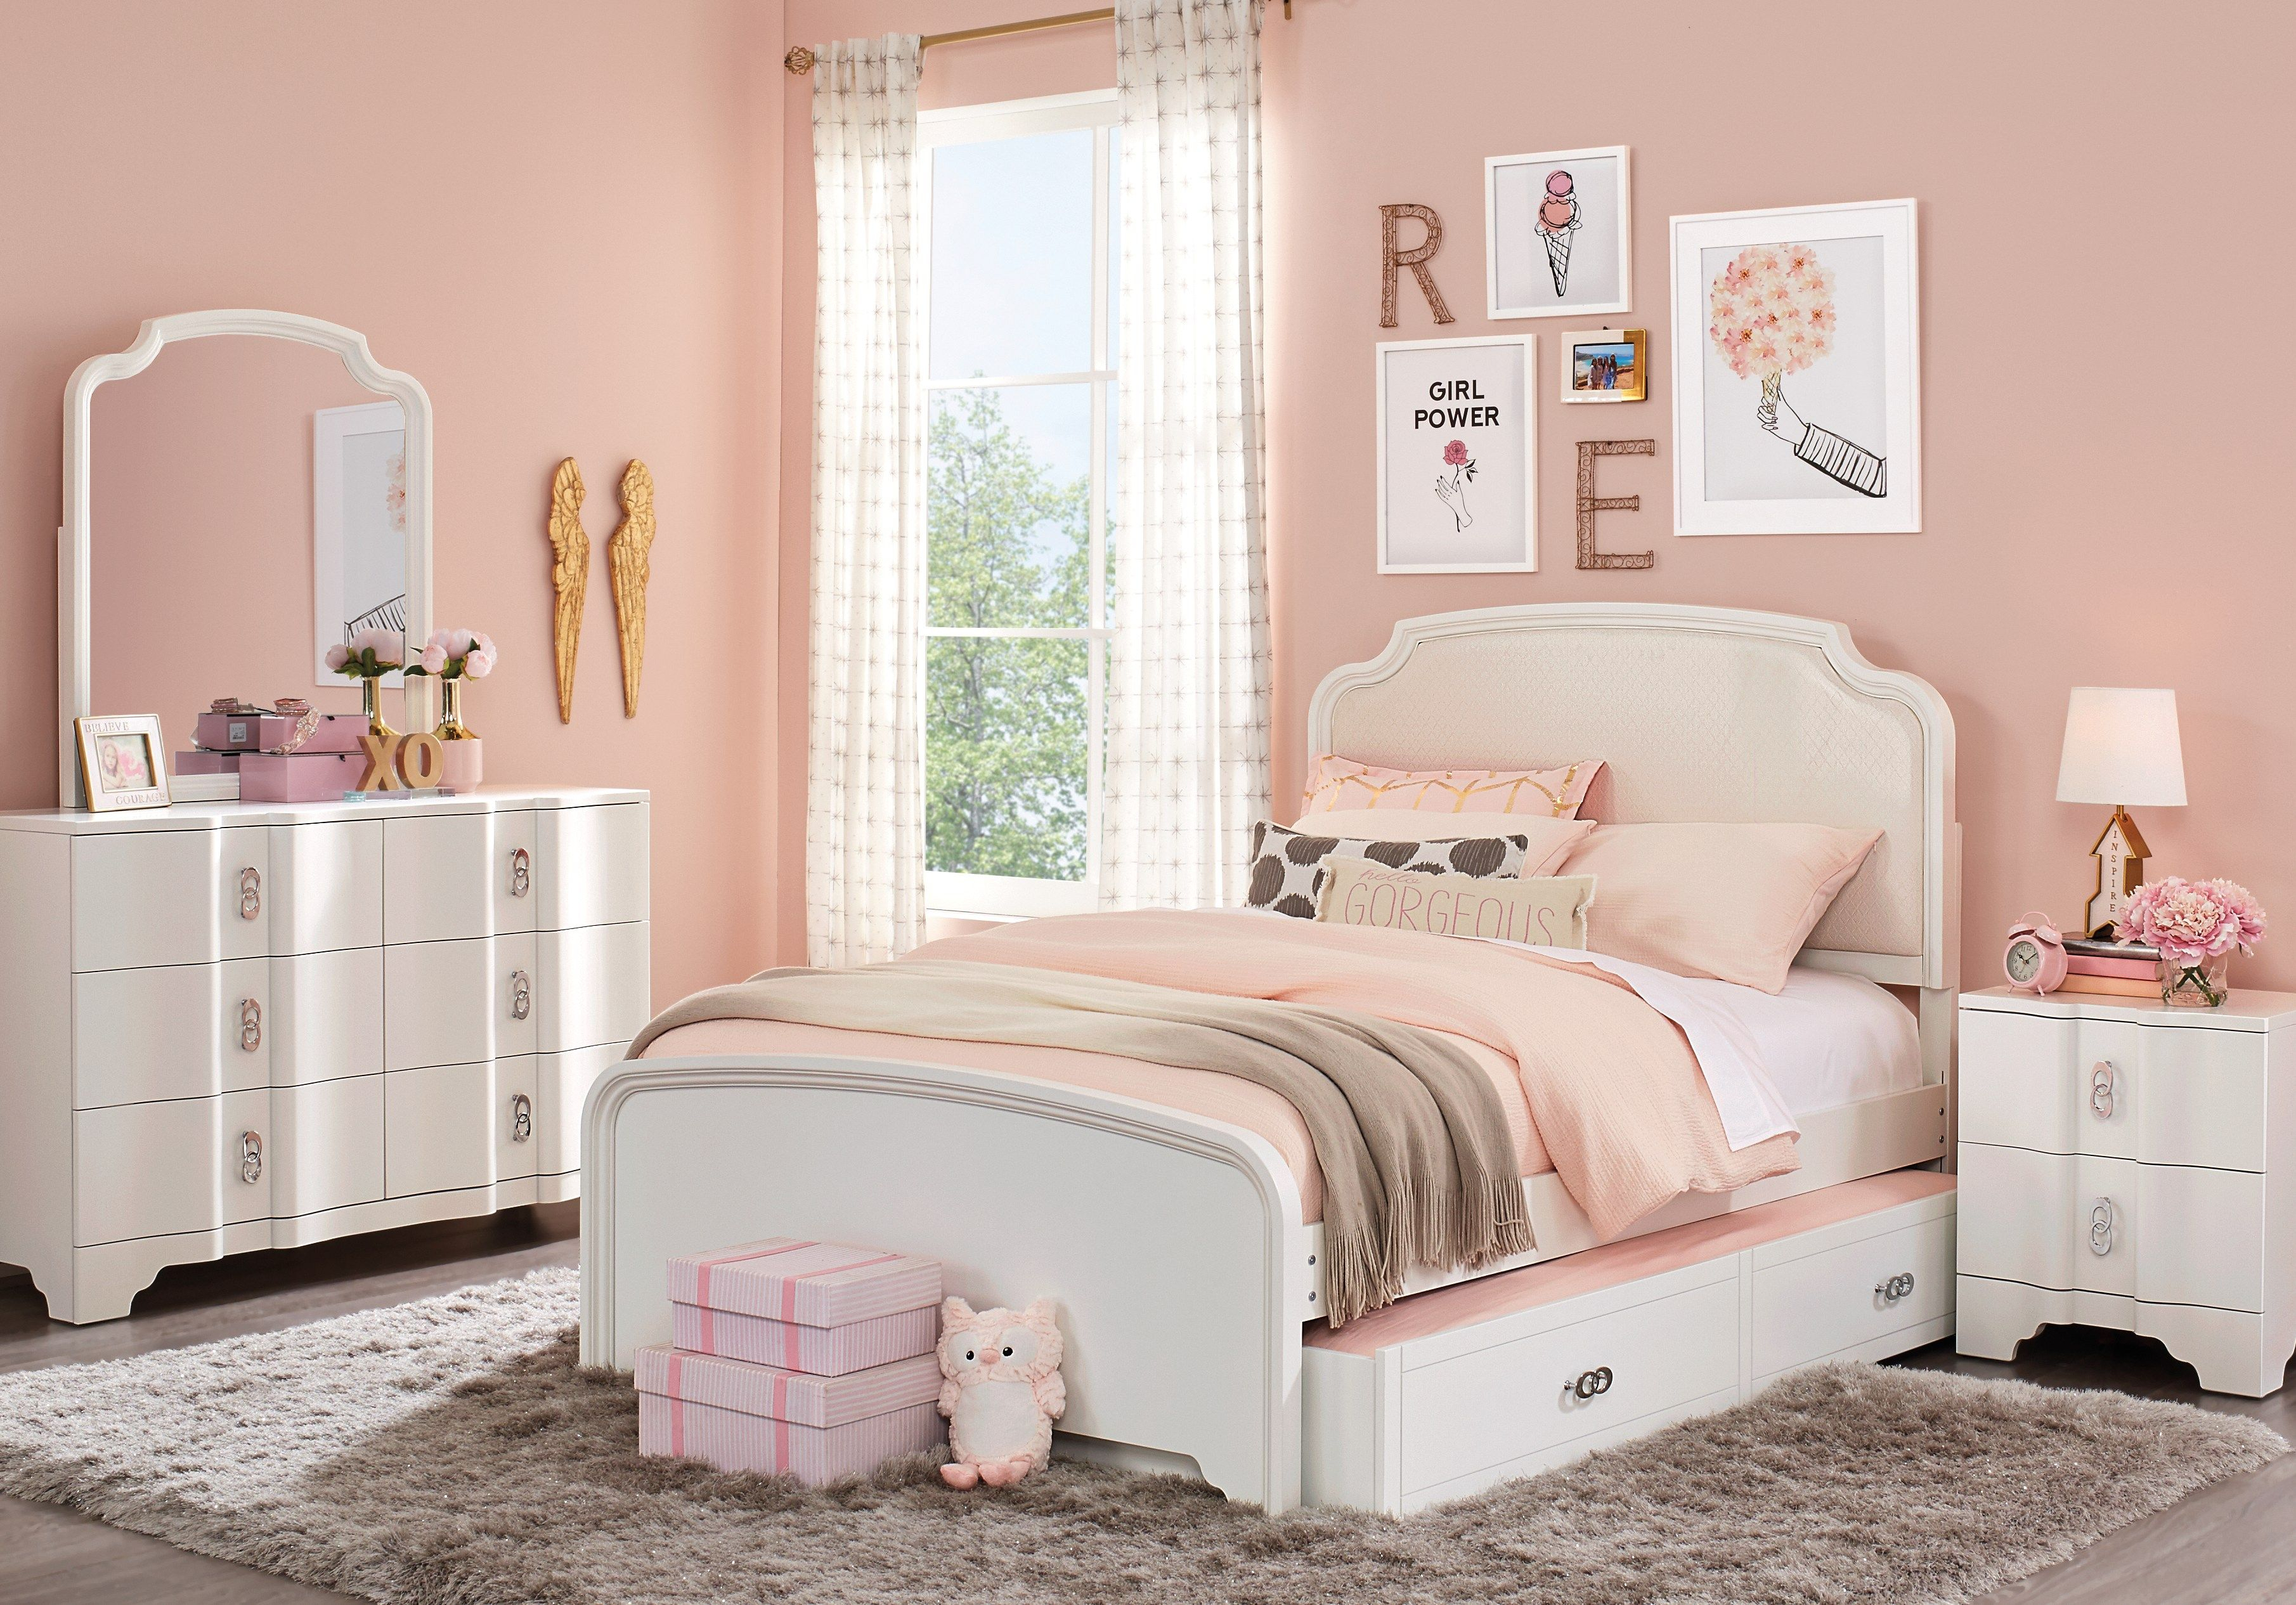 Rylee White 5 Pc Full Upholstered Bedroom Teen Bedroom Sets Colors pertaining to dimensions 3621 X 2531